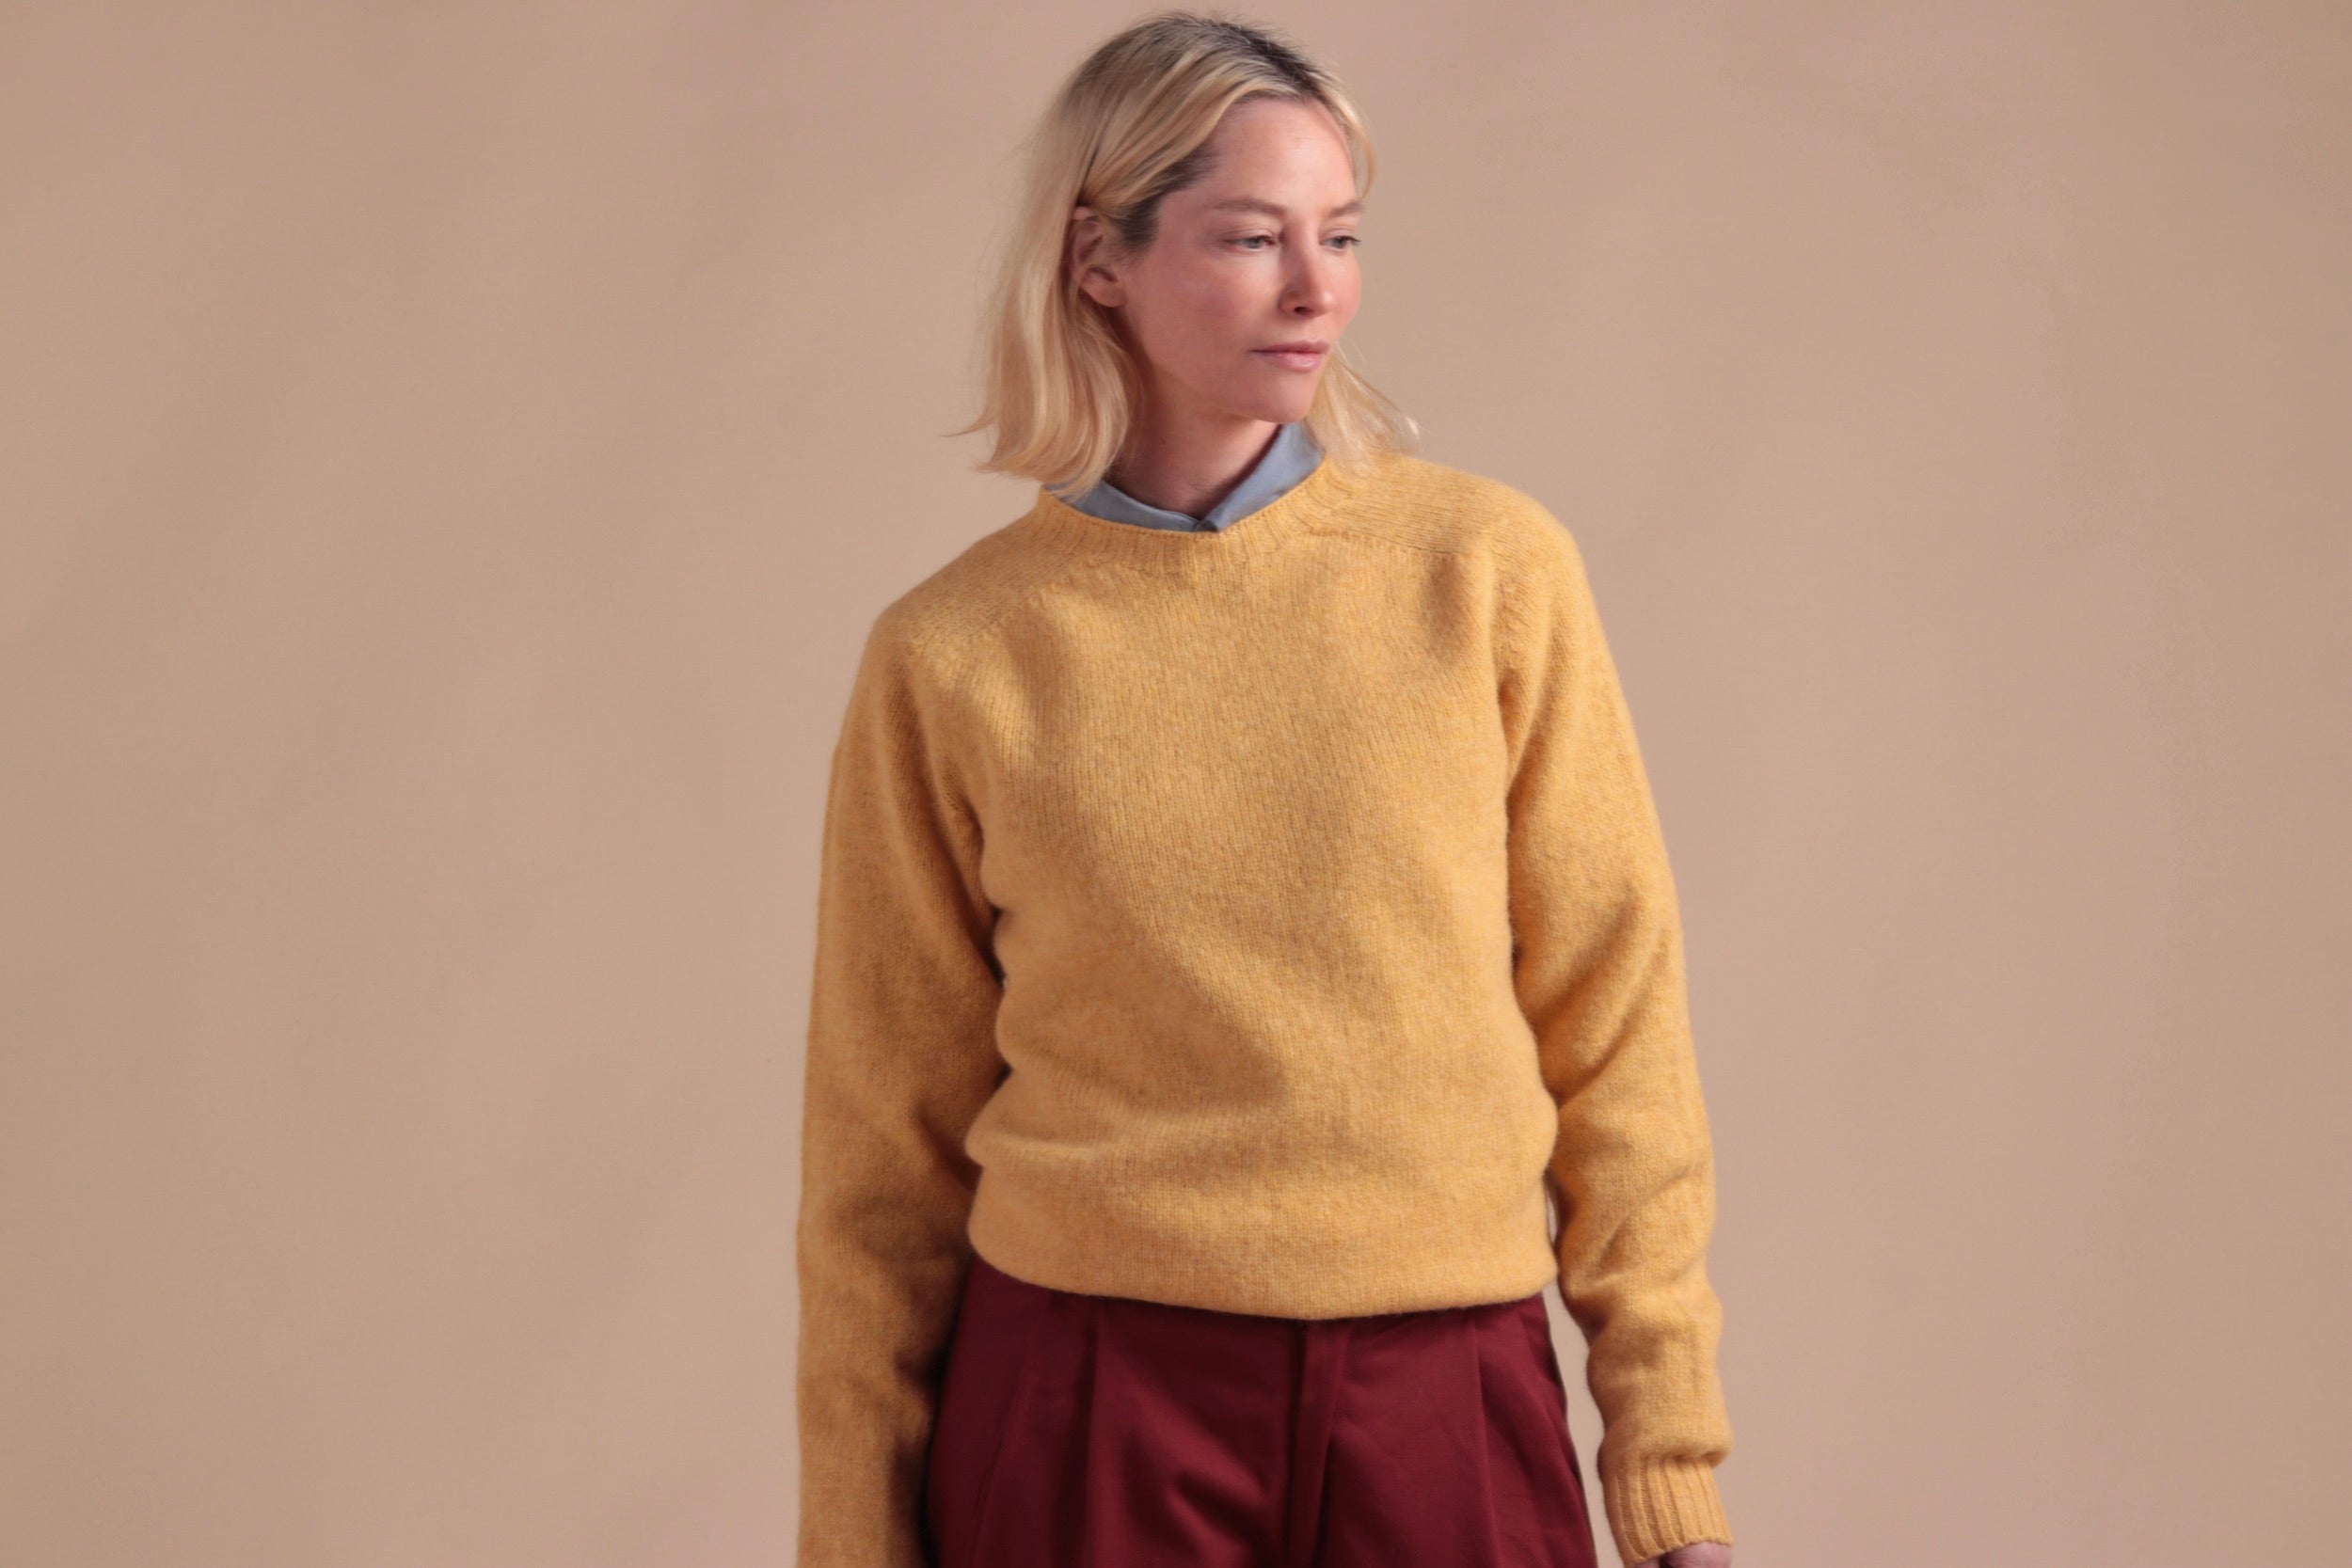 Woman wearing Carrier Company Shetland Lambswool Jumper in Chamomile with Breton Red Dutch Trouser in Cotton Drill